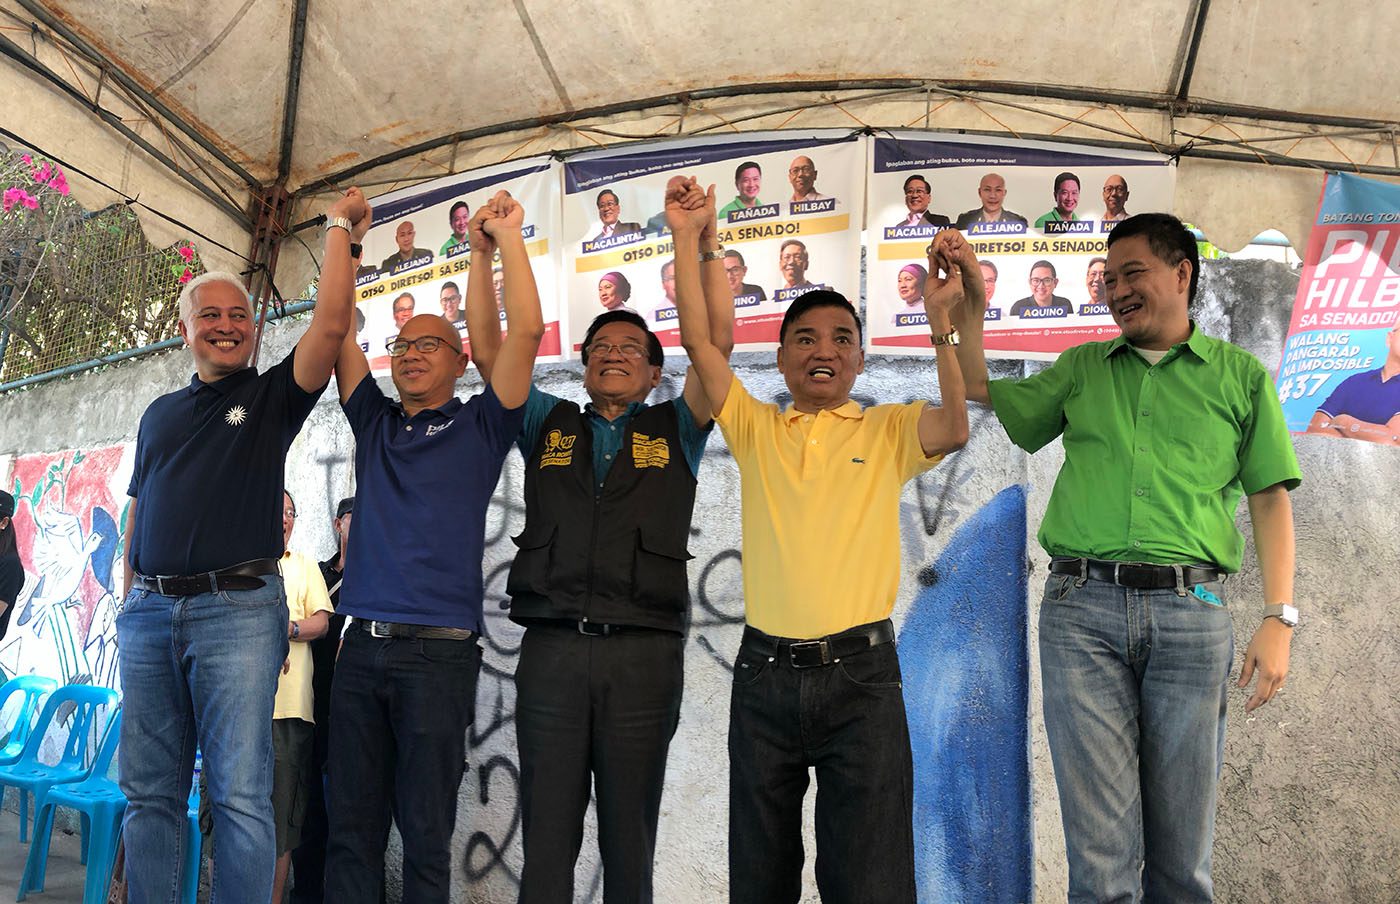 A RARE SCENE. Muntinlupa City Mayor Jaime Fresnedi (2nd from R) raises the hands of Otso Diretso candidates in a campaign event on March 5, 2019. Photo by Mara Cepeda/Rappler    